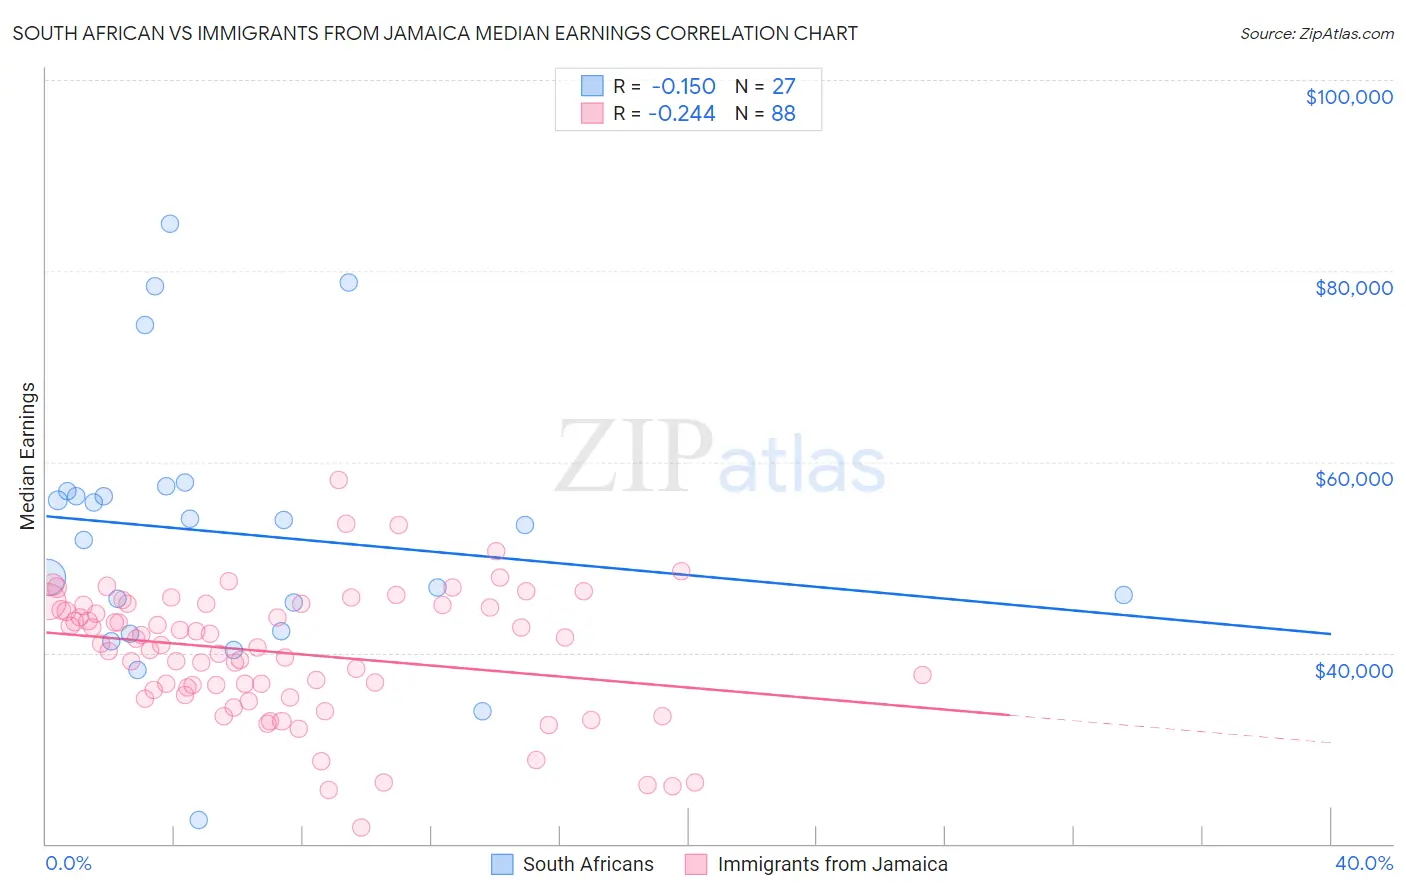 South African vs Immigrants from Jamaica Median Earnings